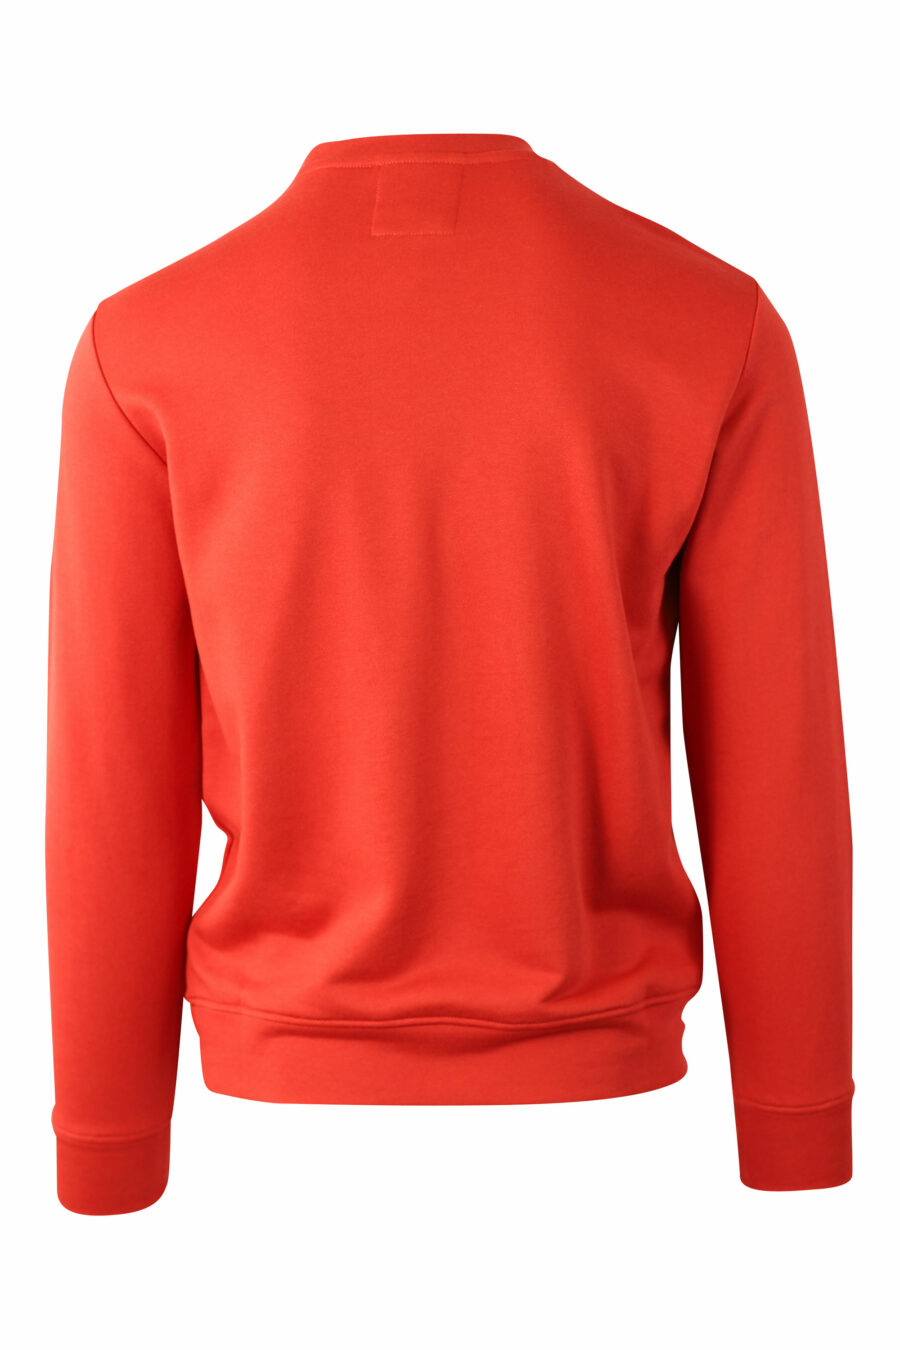 Red sweatshirt with white centred logo - IMG 0052 1